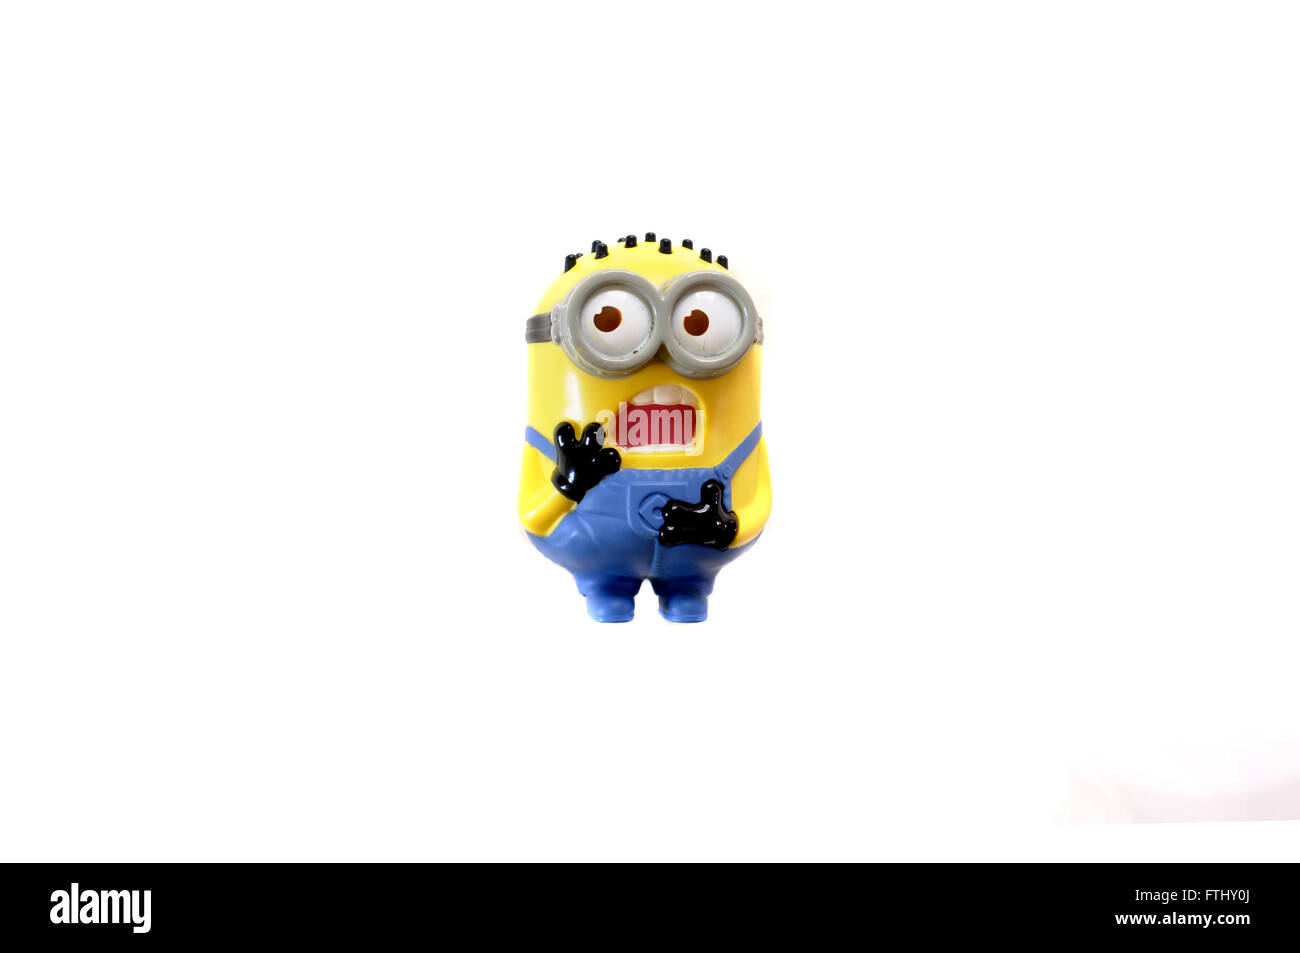 A front view of a toy figure from the Minions film photographed against a white background. Stock Photo